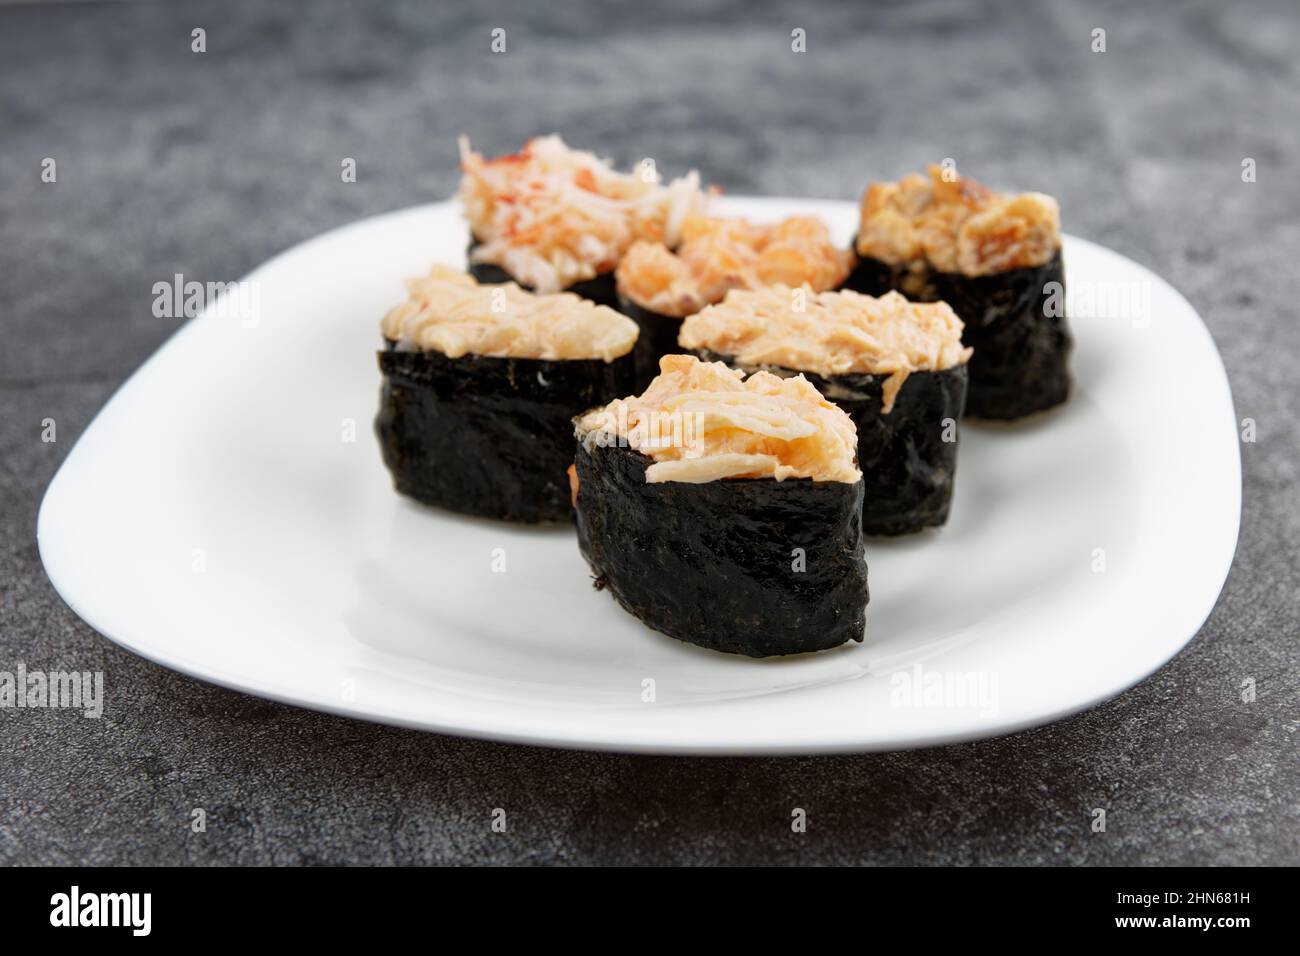 Set of gunkan sushi with spicy sauce on plate Stock Photo